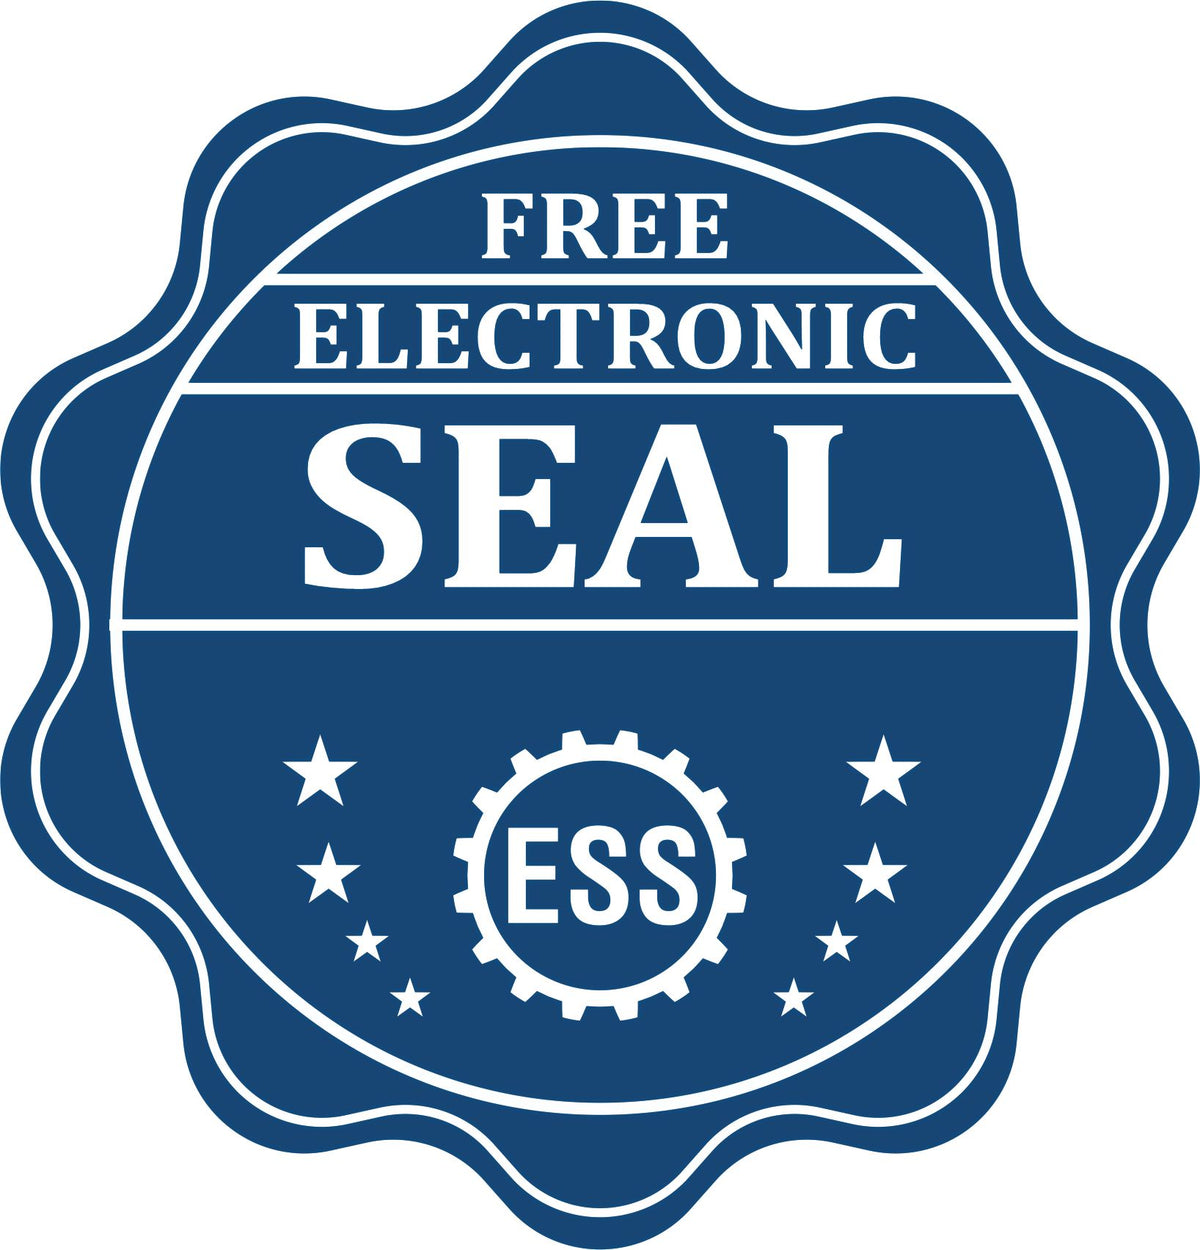 A badge showing a free electronic seal for the Gift Idaho Land Surveyor Seal with stars and the ESS gear on the emblem.